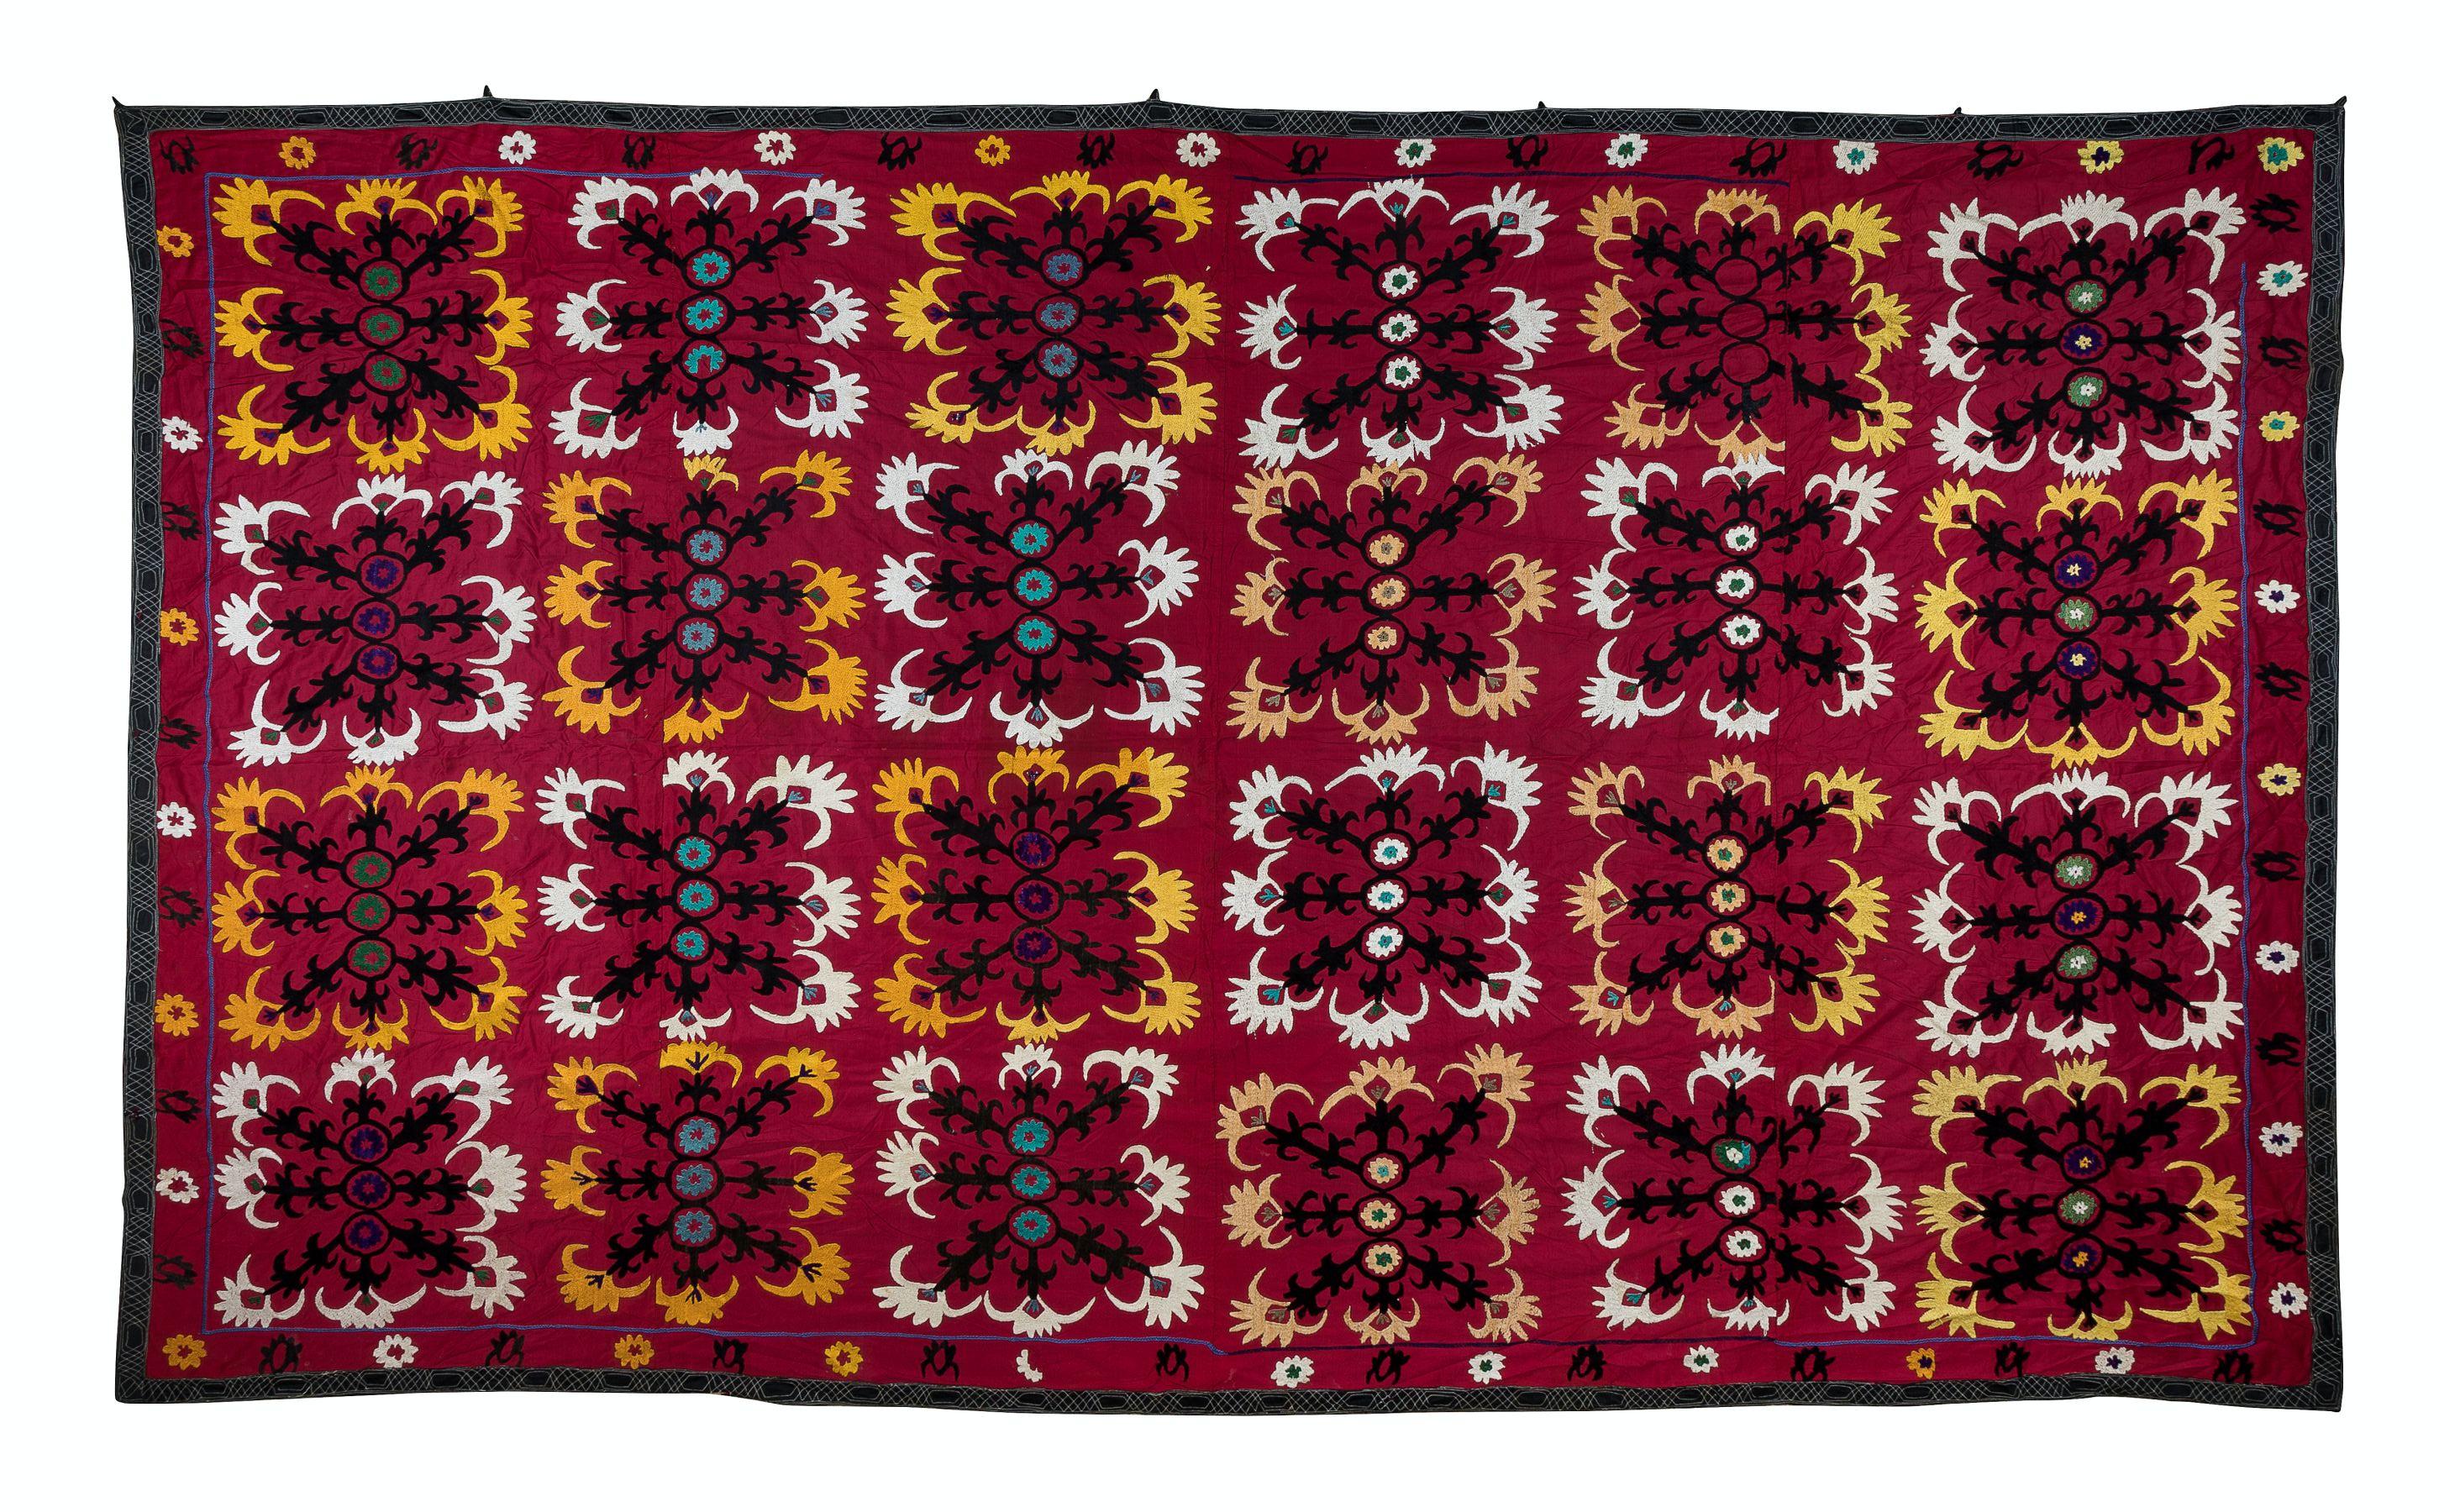 20th Century Vintage Silk Hand Embroidery Bed Cover, Uzbek Suzani Textile Throw For Sale